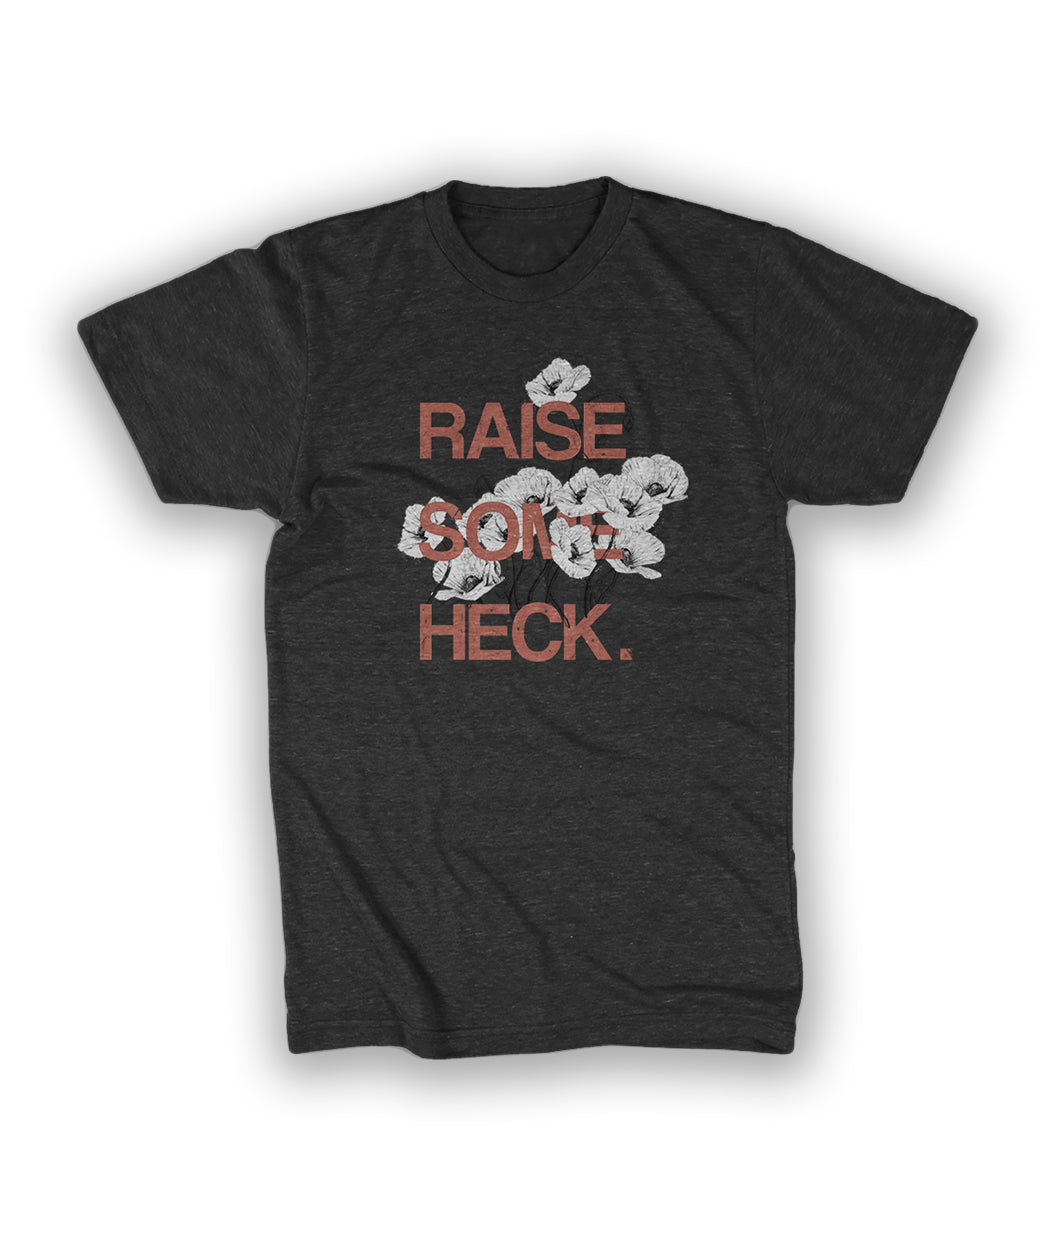 Gray shirt with “Raise Some Heck.” in red sans serif font in the center of the shirt, each word stacked on top of the other, with white flowers surrounding the word “Some” - from Tyler Thrasher